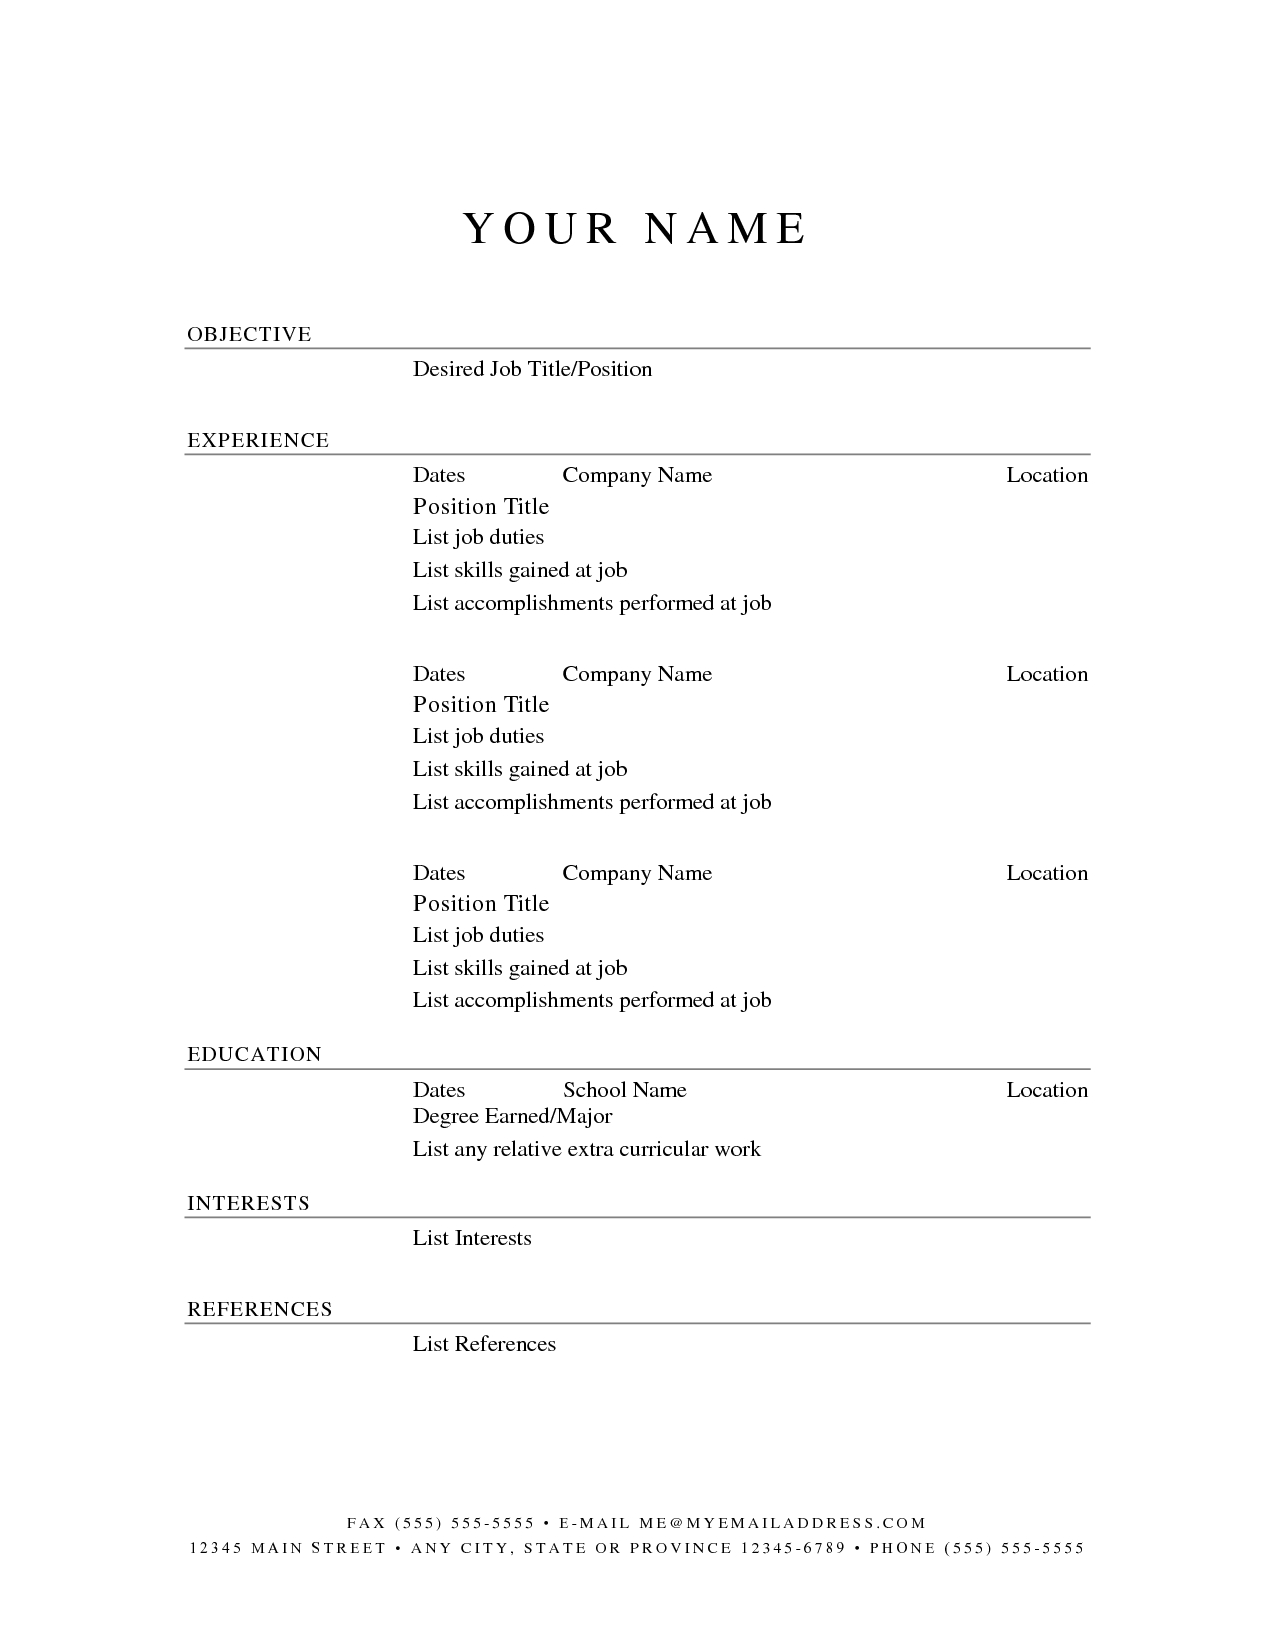 Resume Examples Printable | Resume Examples | Sample Resume - Free Online Resume Templates Printable